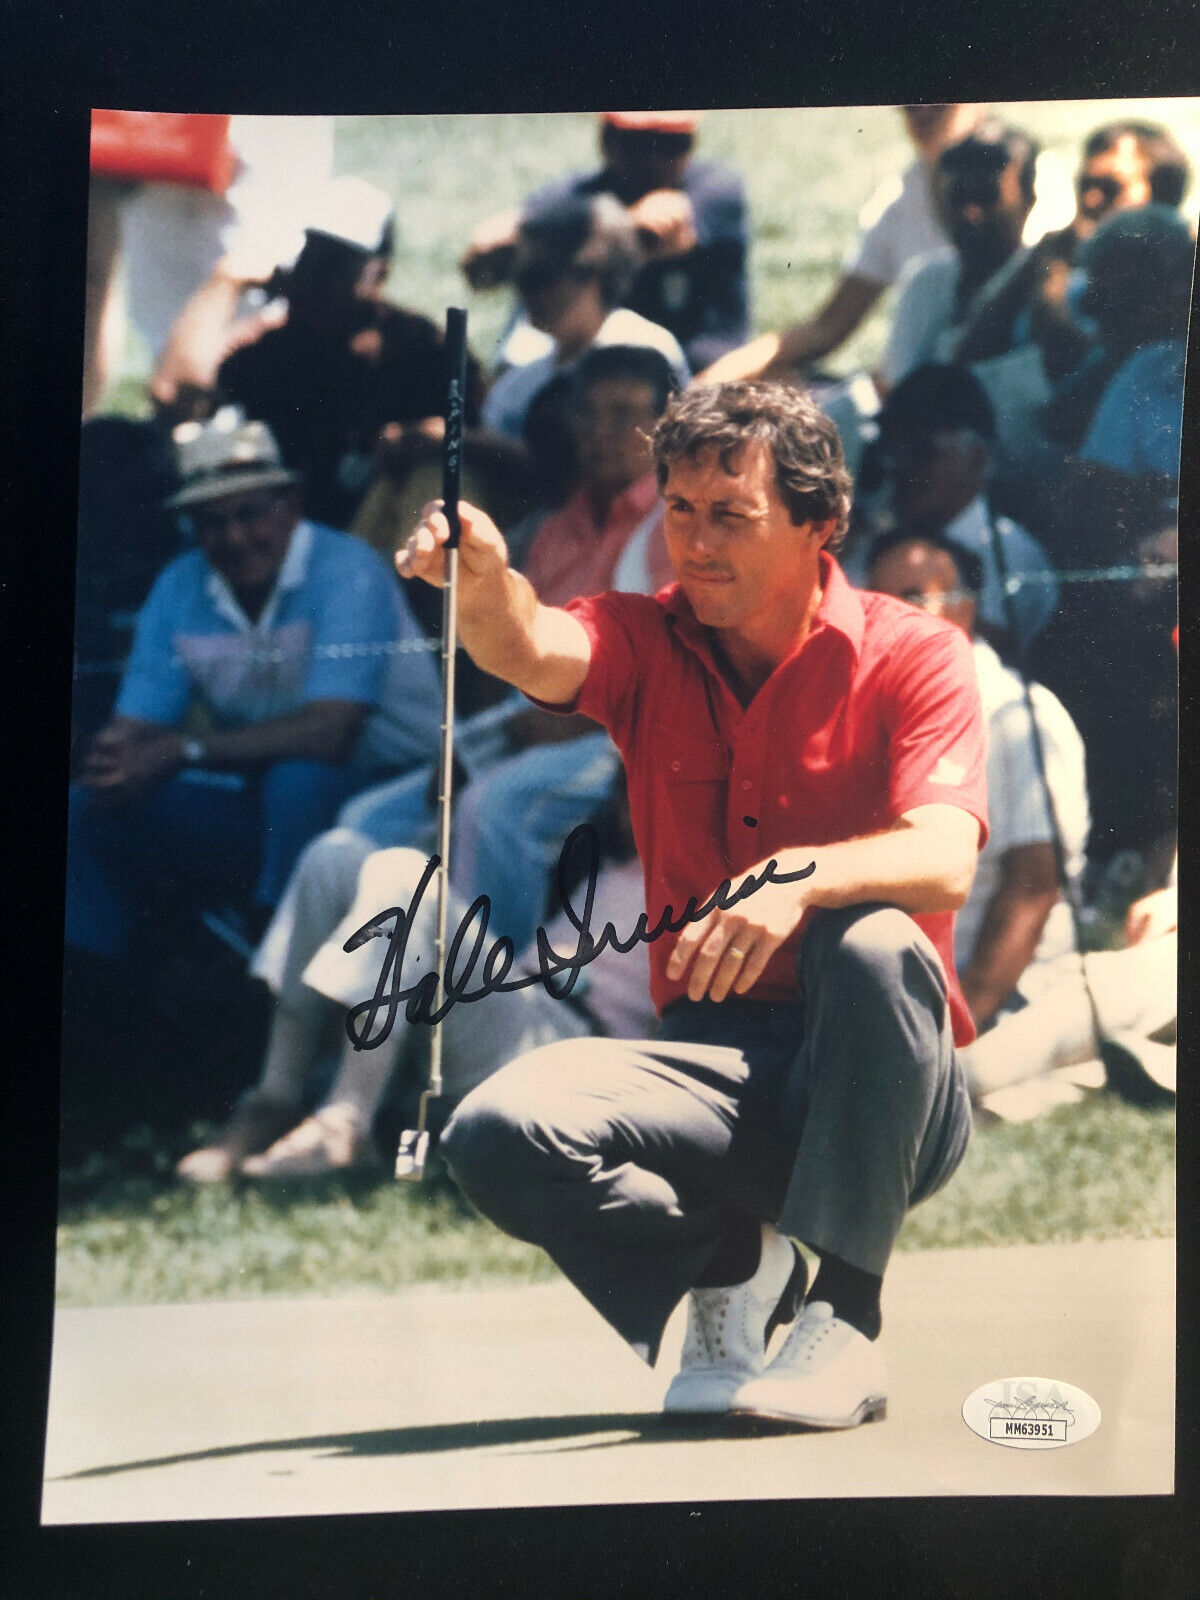 Hale Irwin Signed Autographed Photo Poster painting - PGA Golf Champion - JSA Authentic